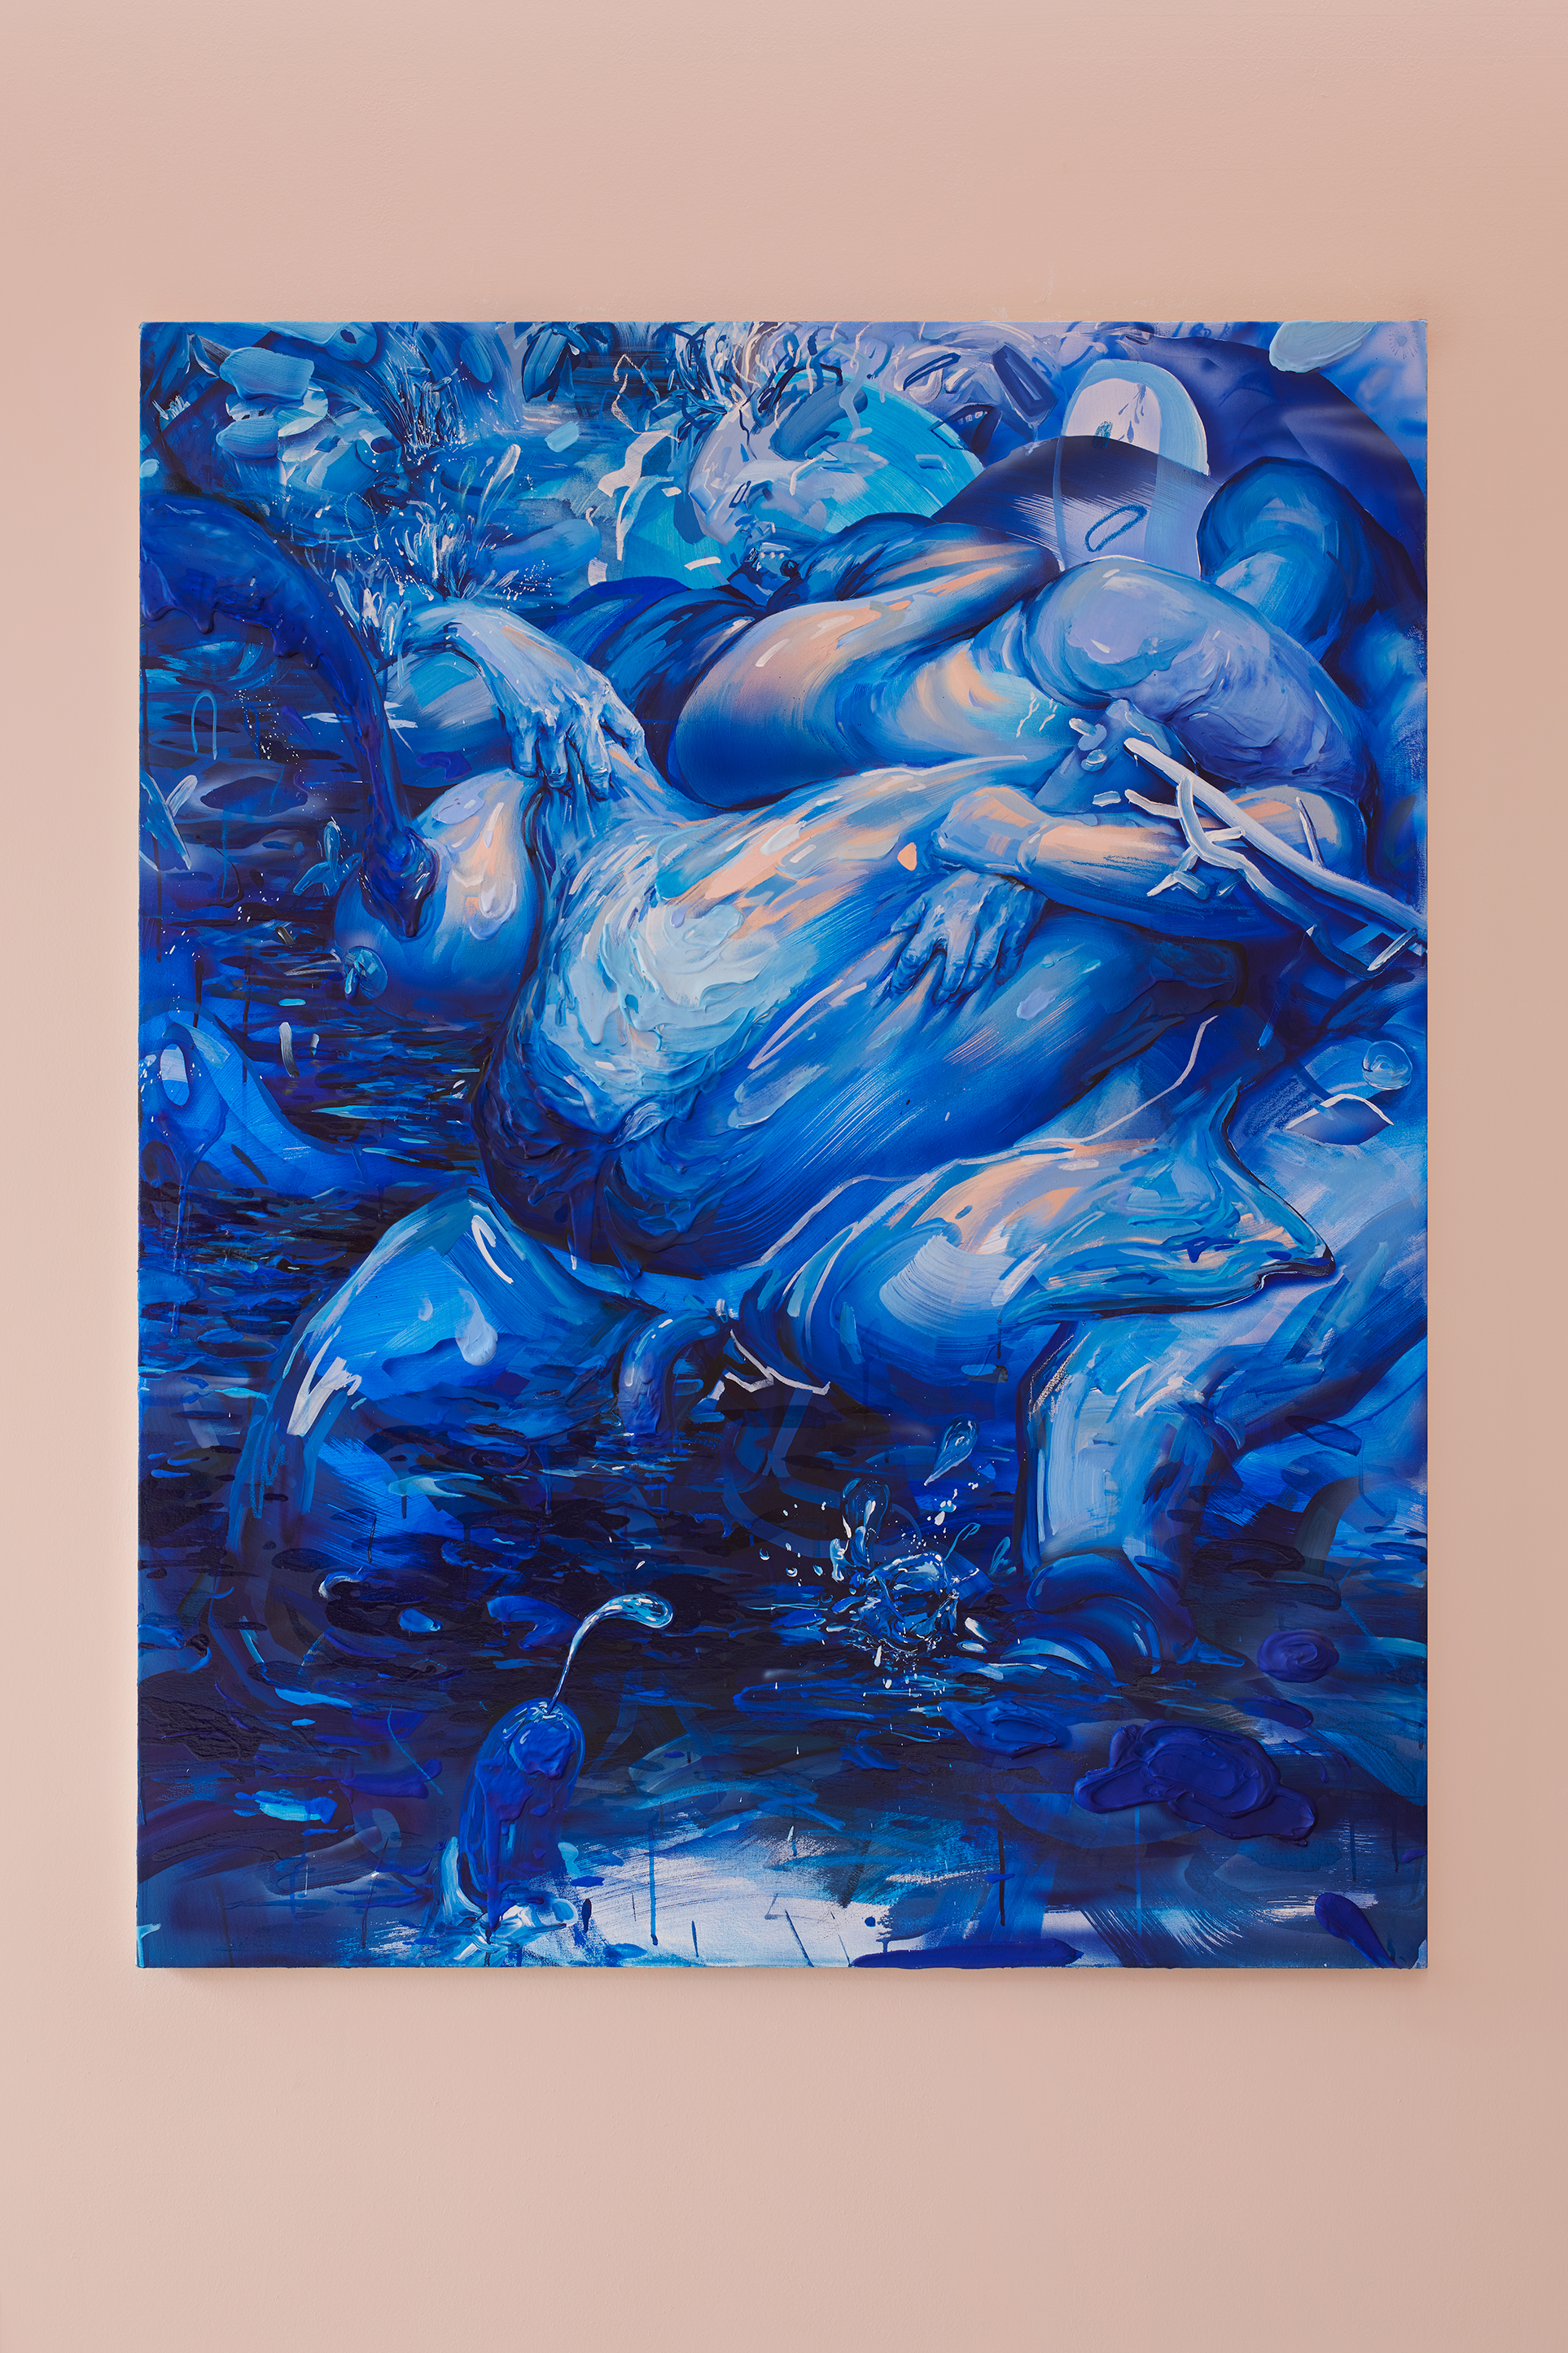 Image: "She Bad" is a painting consisting of mostly vibrant blue shades hangs in portrait orientation. There is an abstract body with bulbous shapes and a phallic shape at the bottom. Image courtesy of the artist.